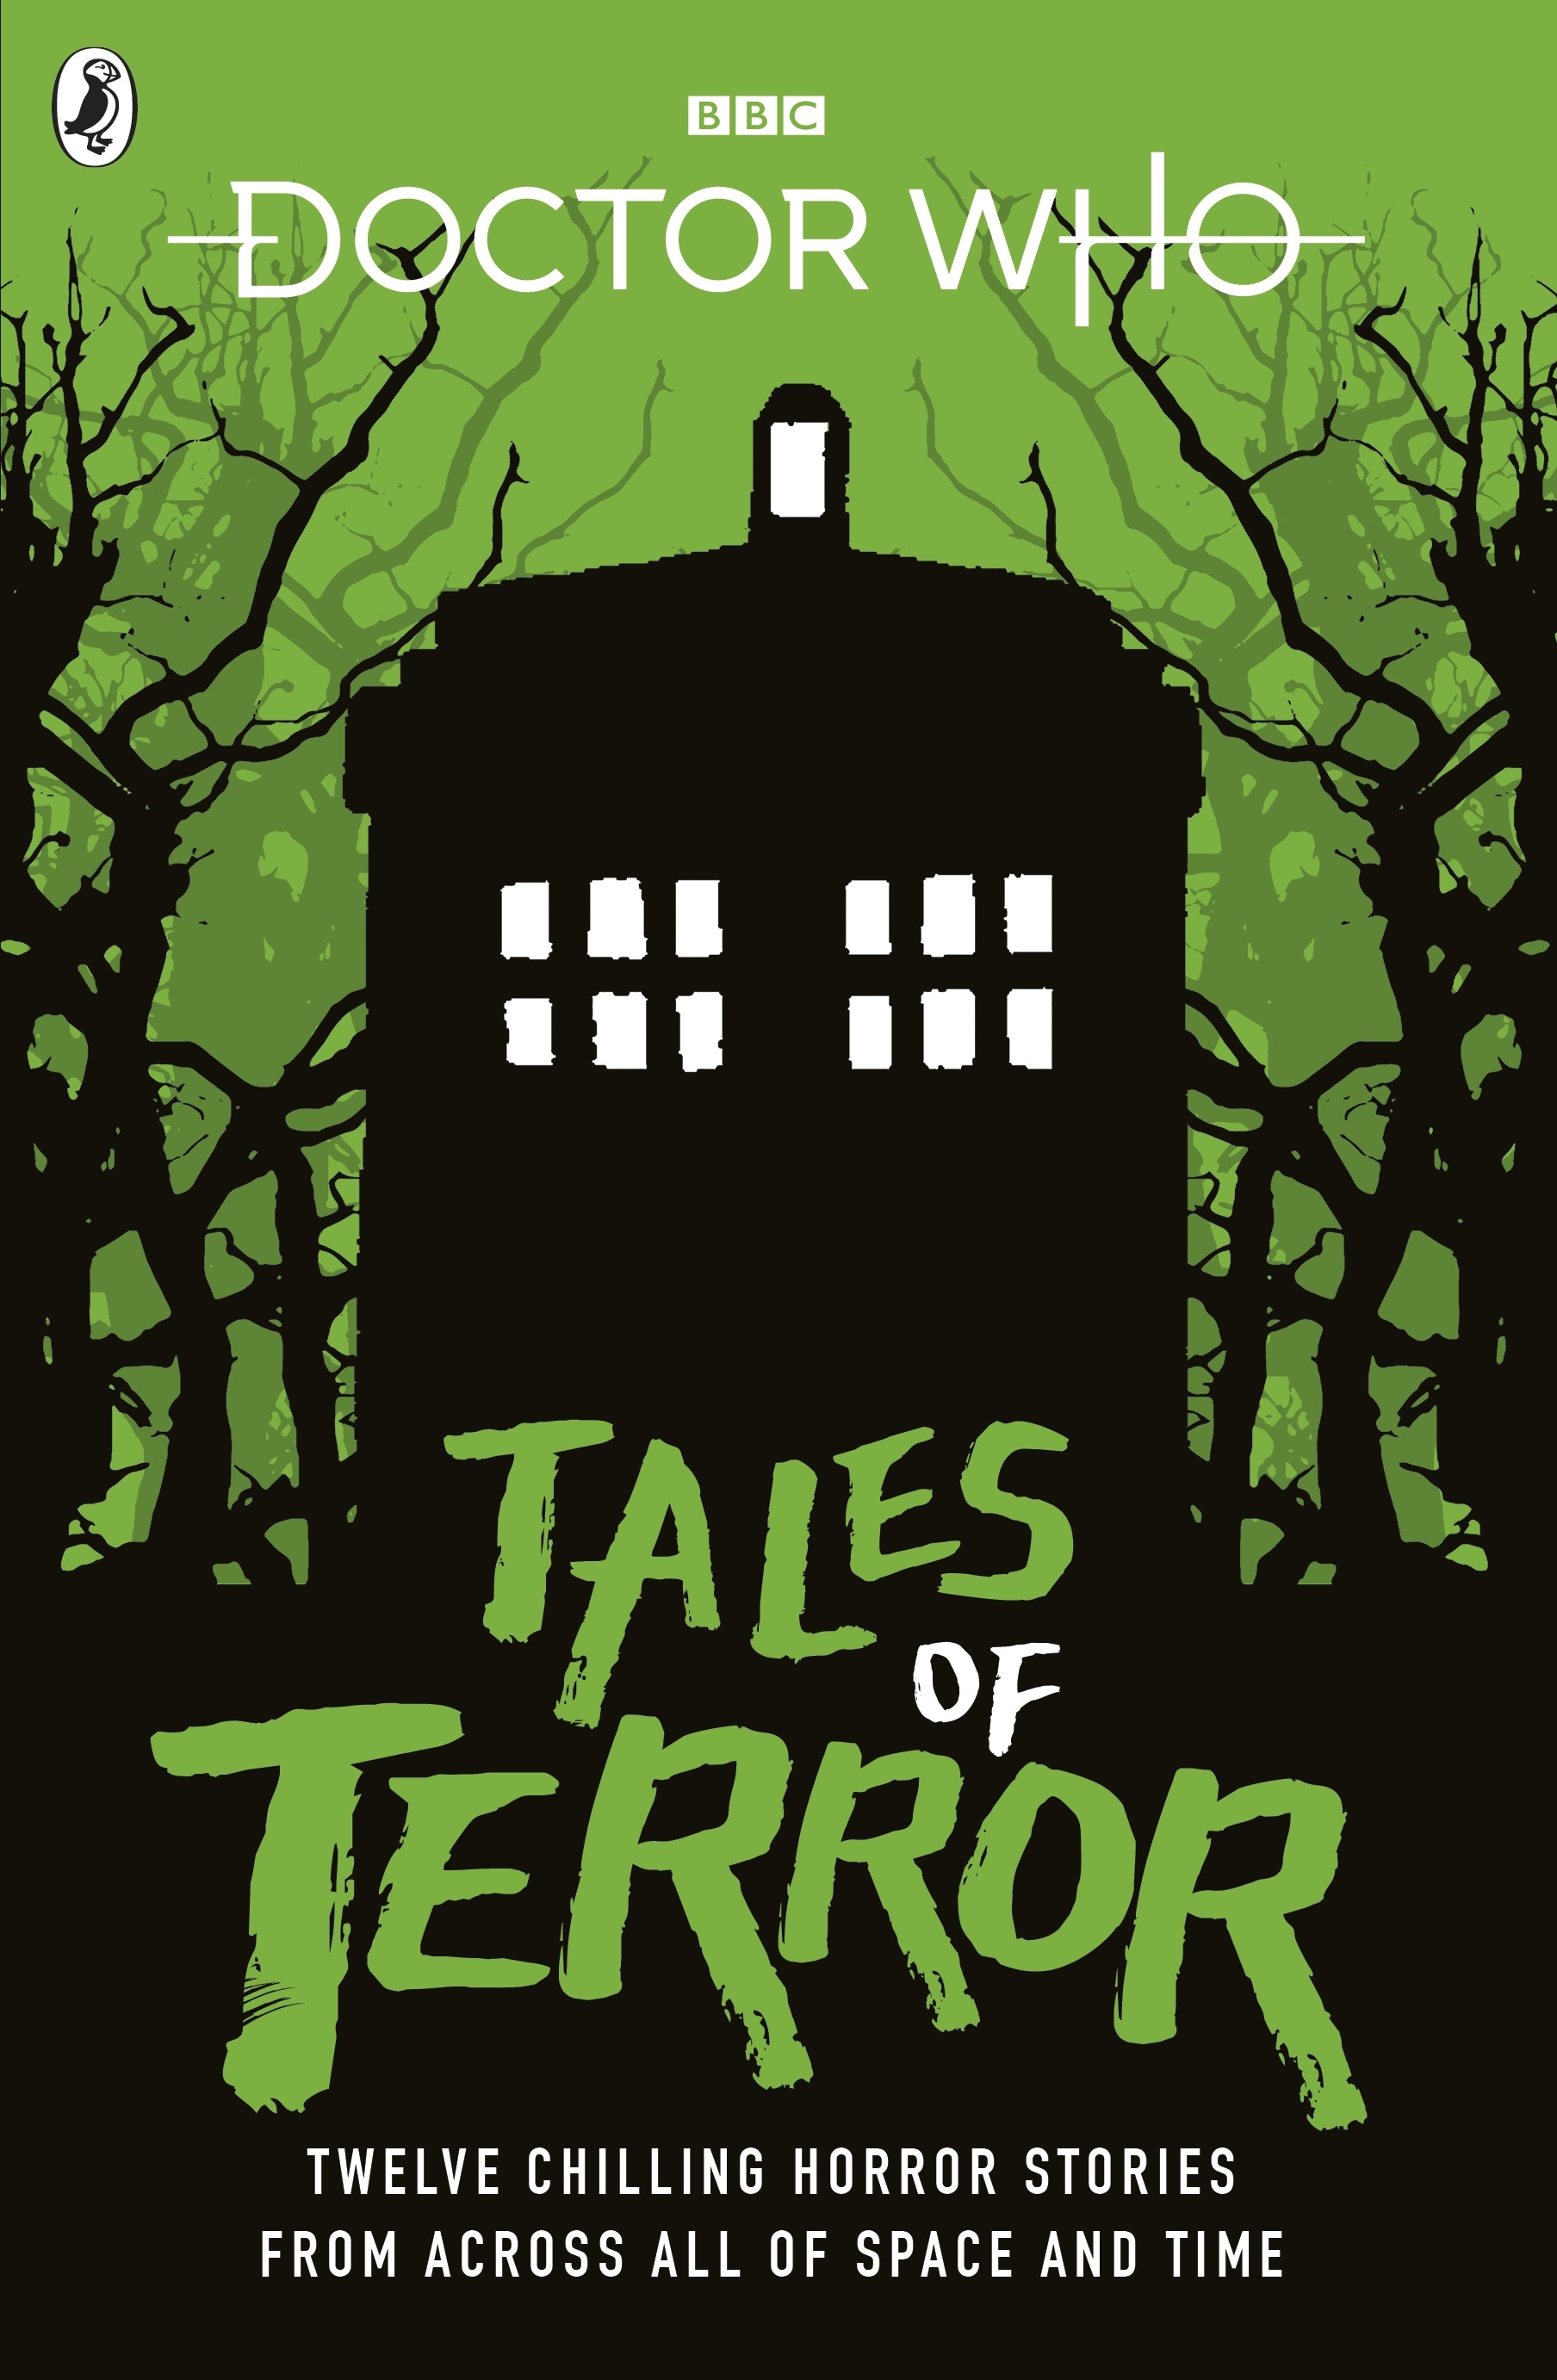 Book “Doctor Who: Tales of Terror” by Mike Tucker — September 5, 2019